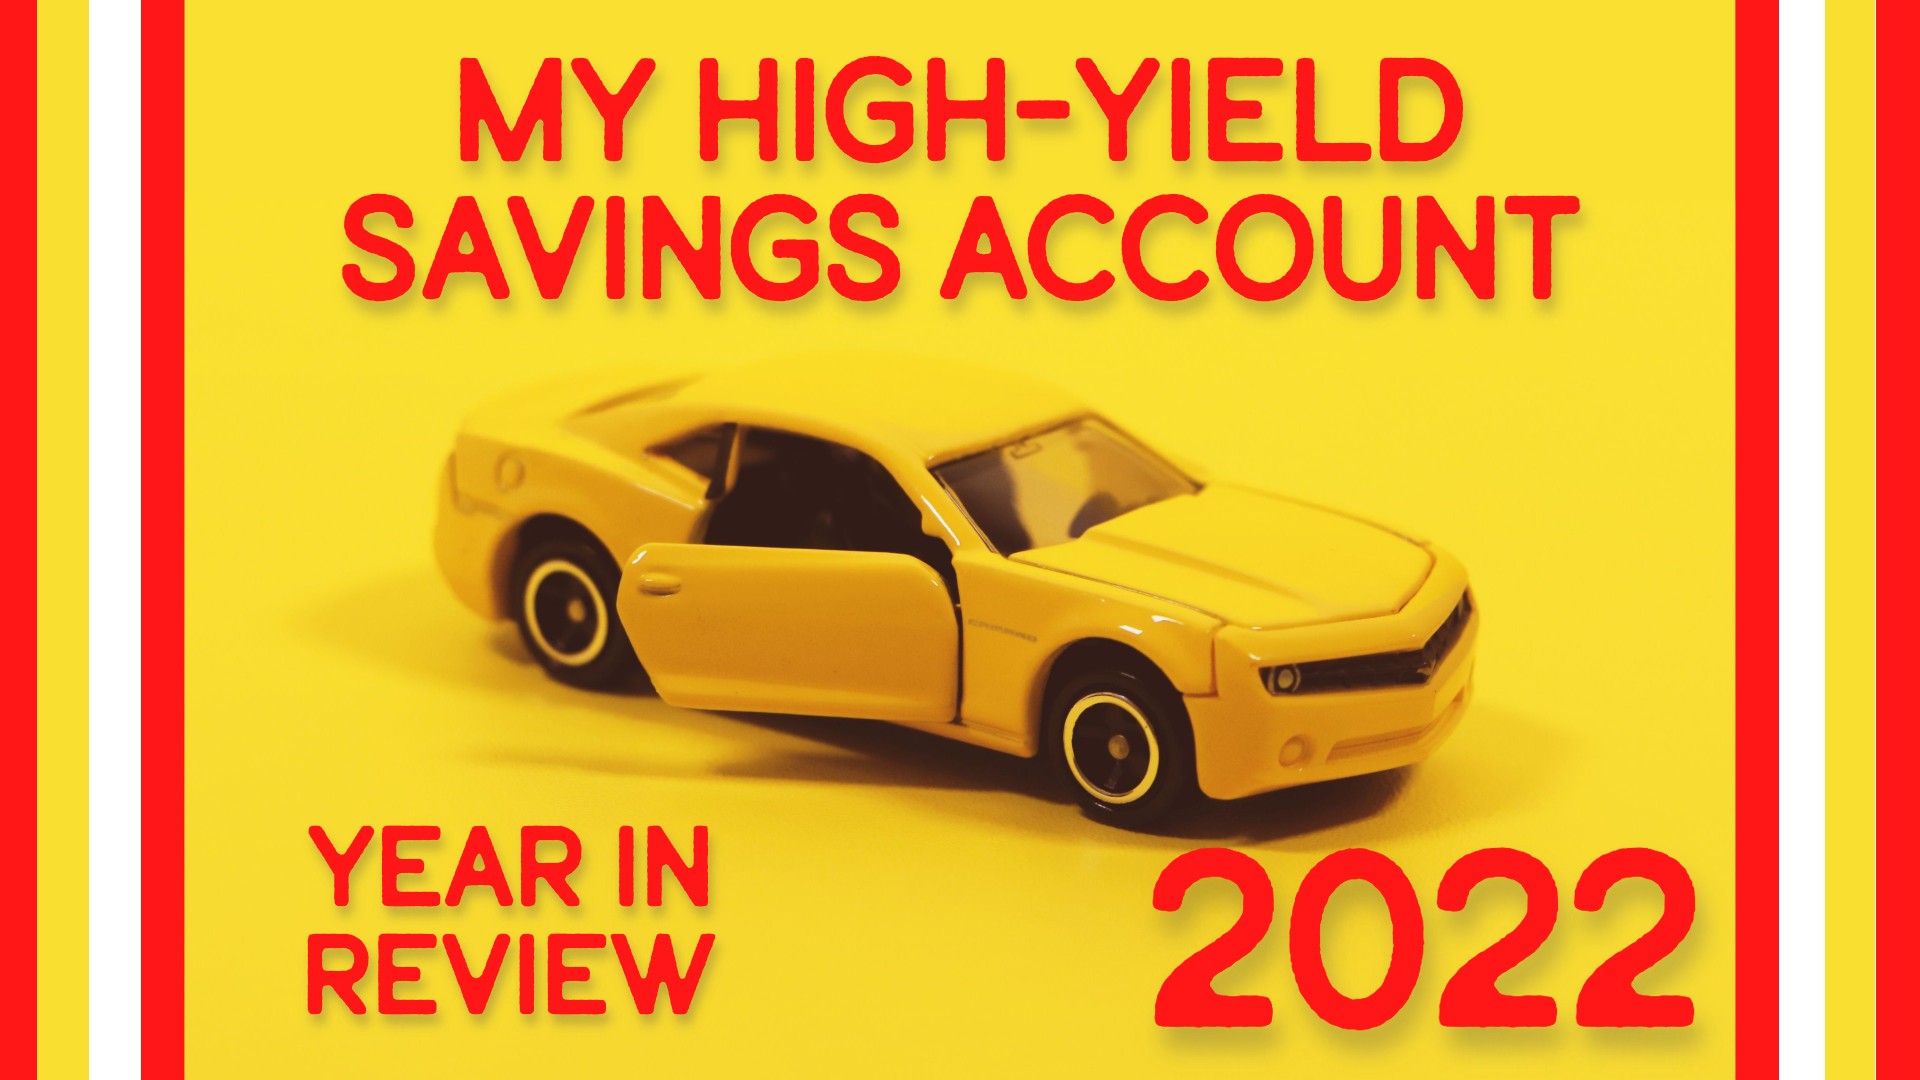 My High-Yield Savings Account: Year in Review 2022